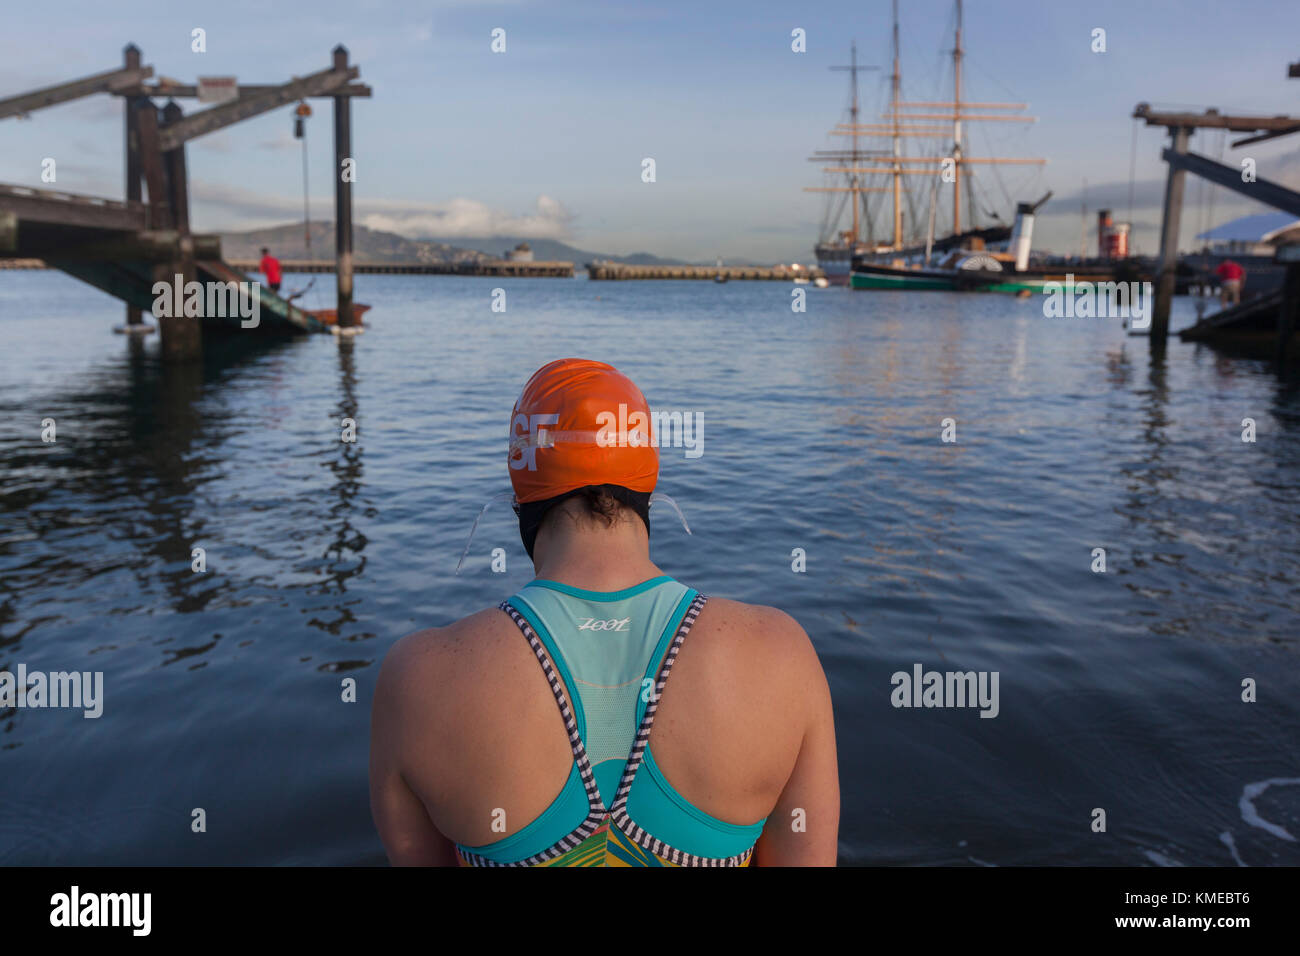 rear view of person in swimsuit, Dolphin Club, San Francisco, California, USA Stock Photo